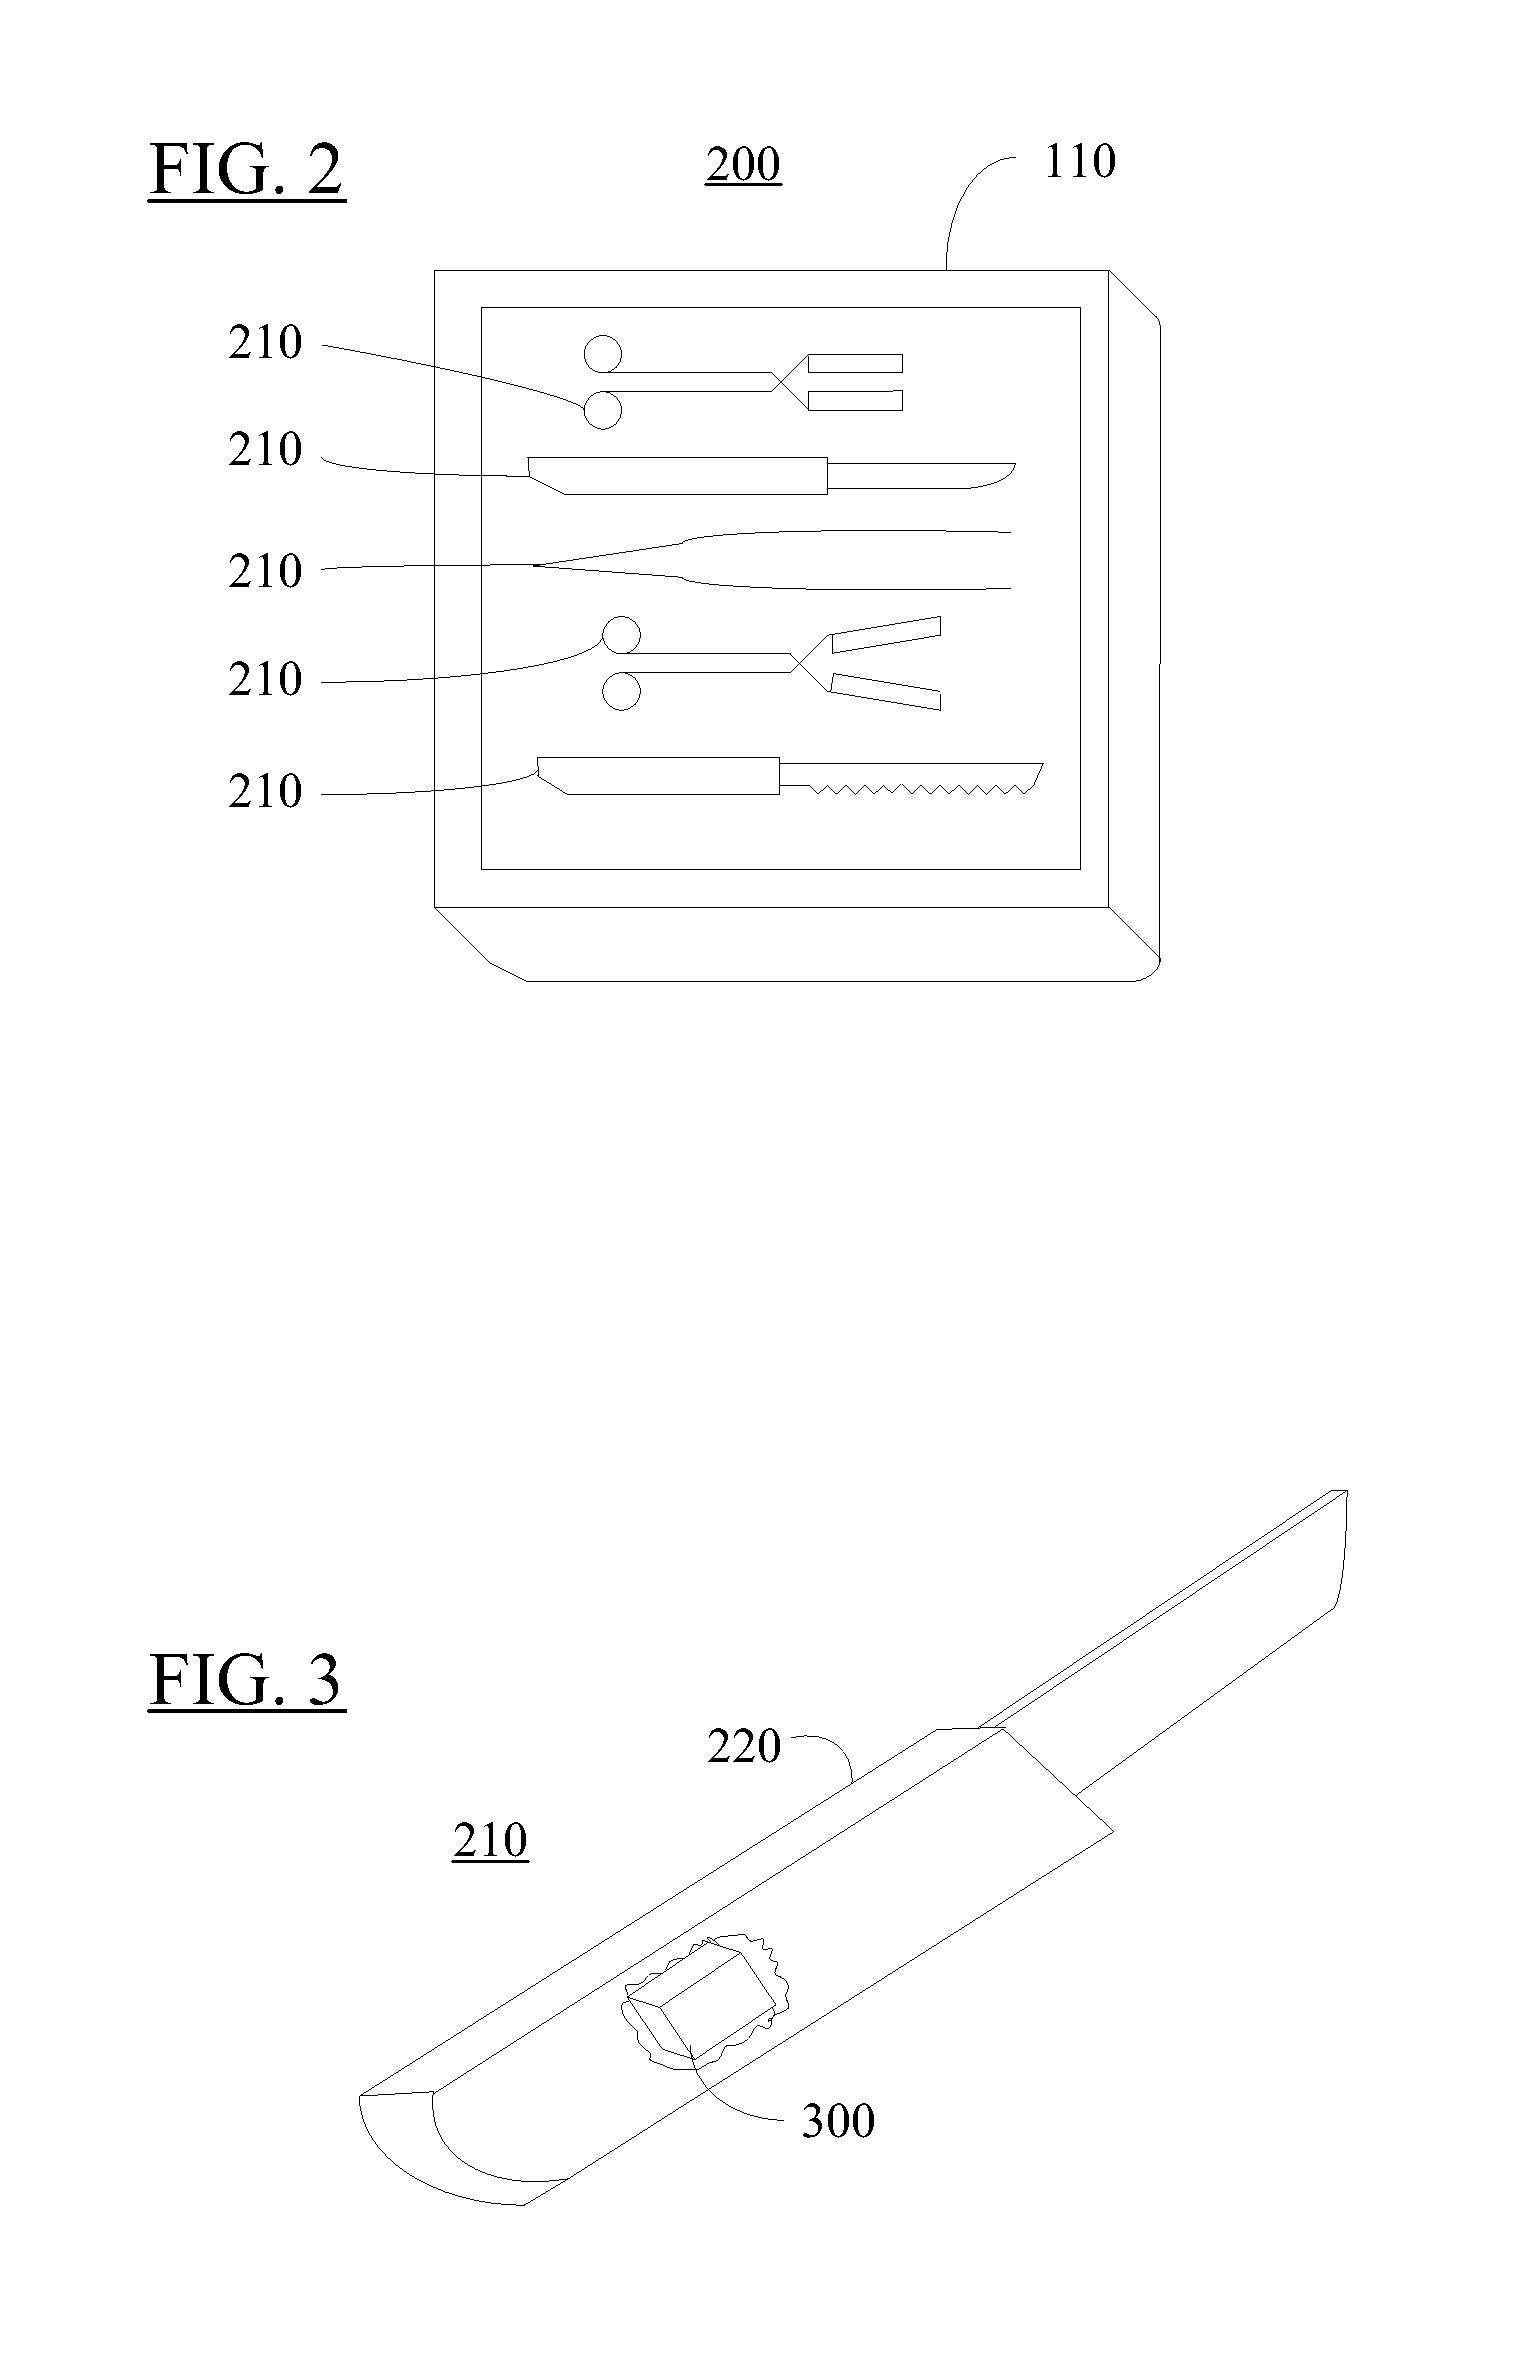 Method and Apparatus for Surgical Instrument Identification